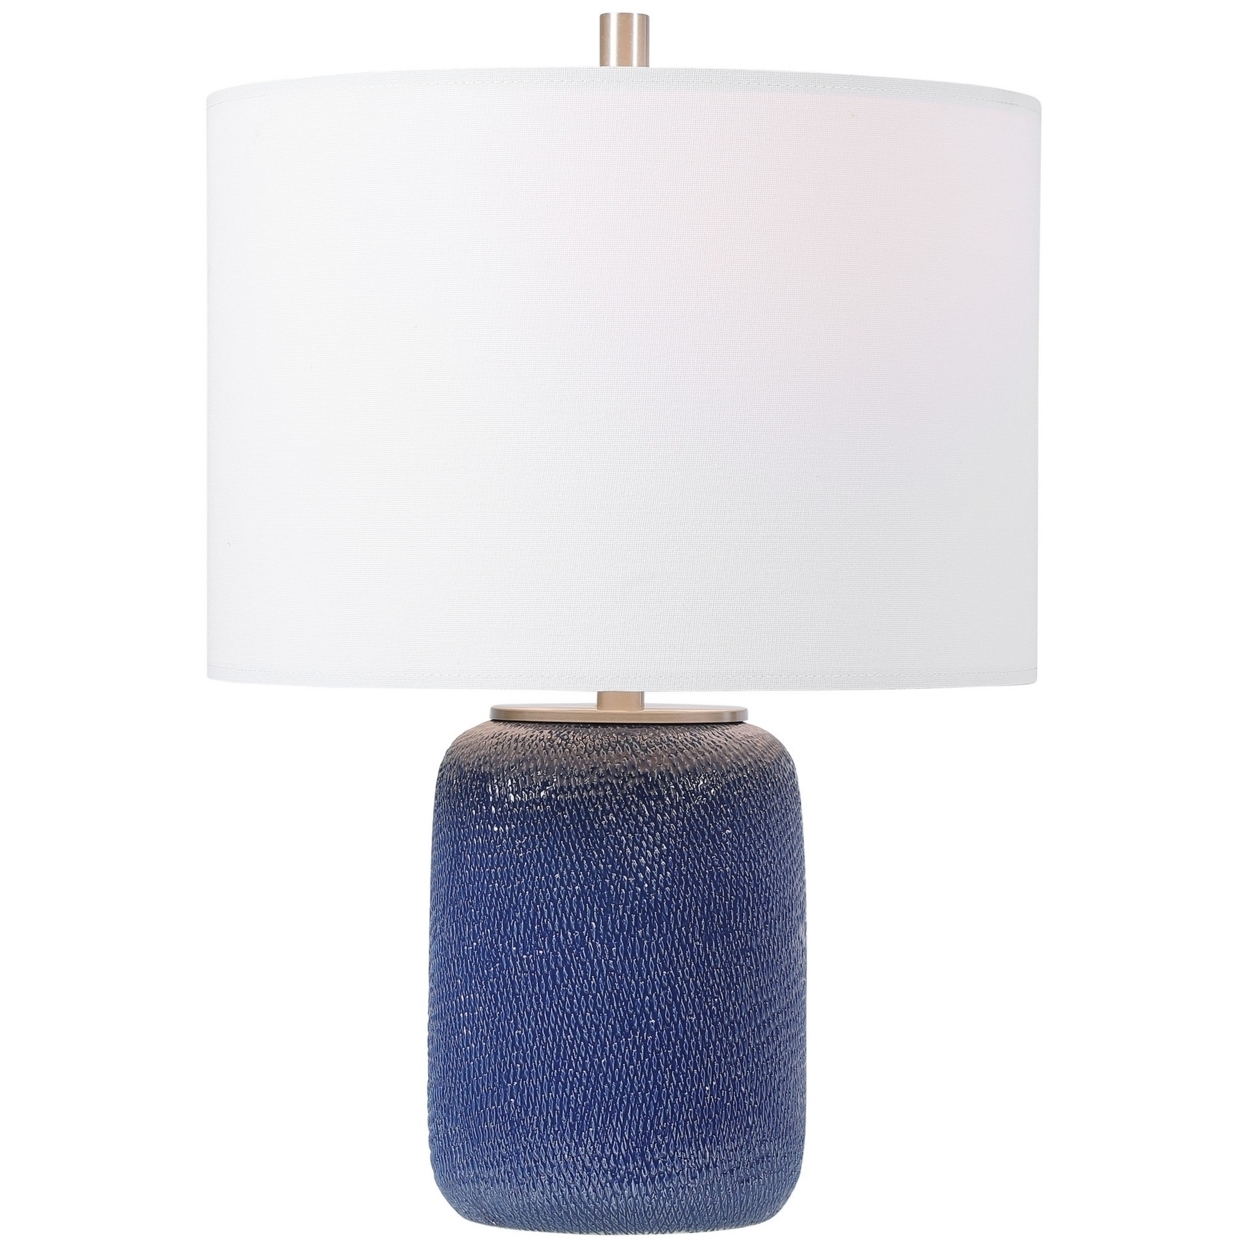 Ceramic Round Bellied Shape Table Lamp with Textured Detail, Blue- Saltoro Sherpi